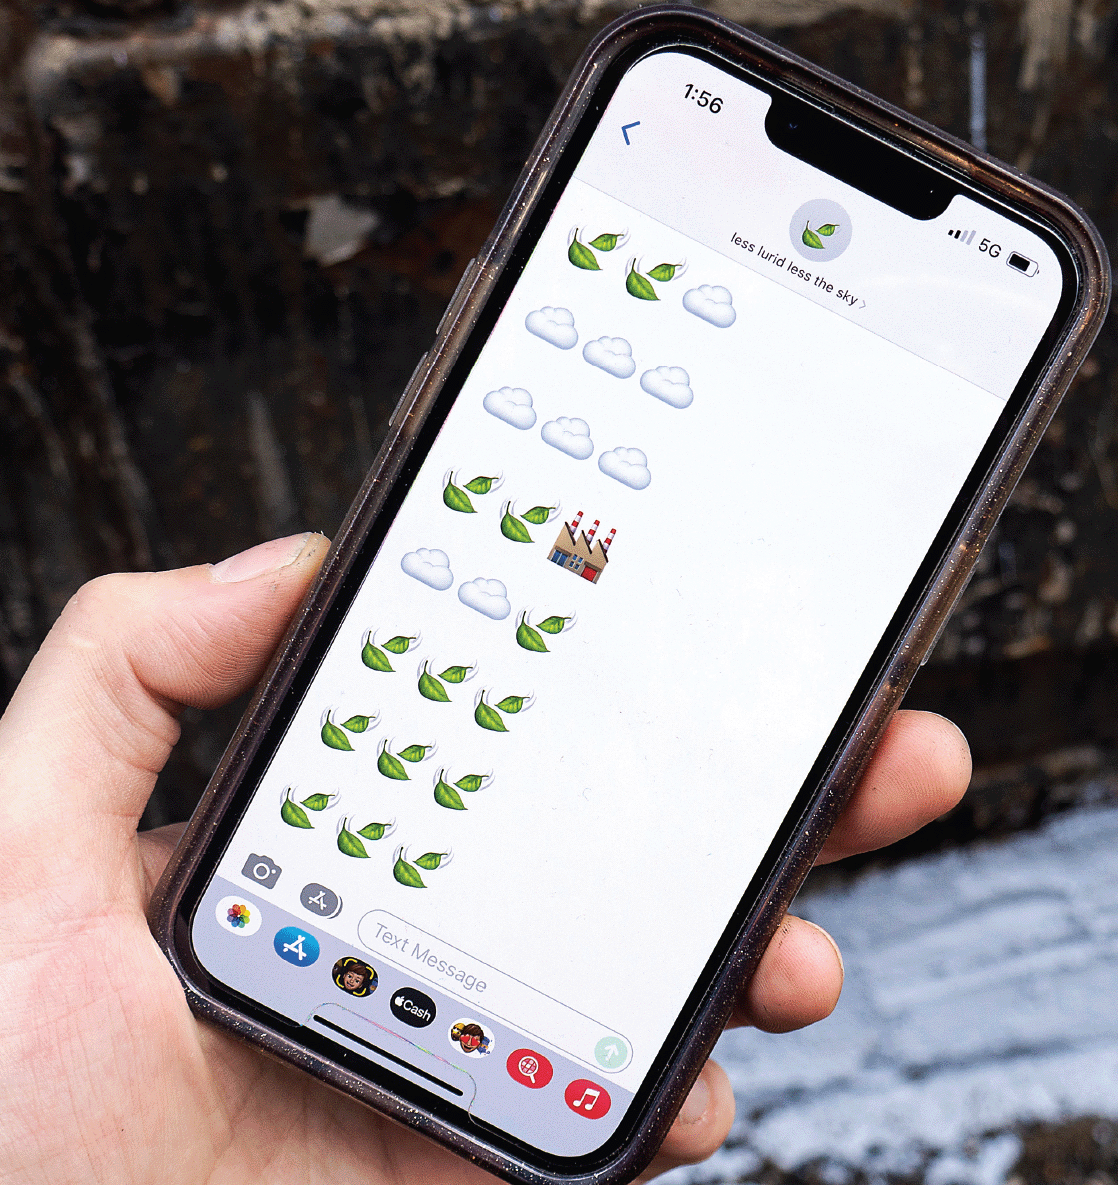 A white hand holds a phone in front of a coal chute; the phone displays an SMS message from "less lurid less the sky" of eight sets of three large emojis including clouds, falling leaves, and a factory.